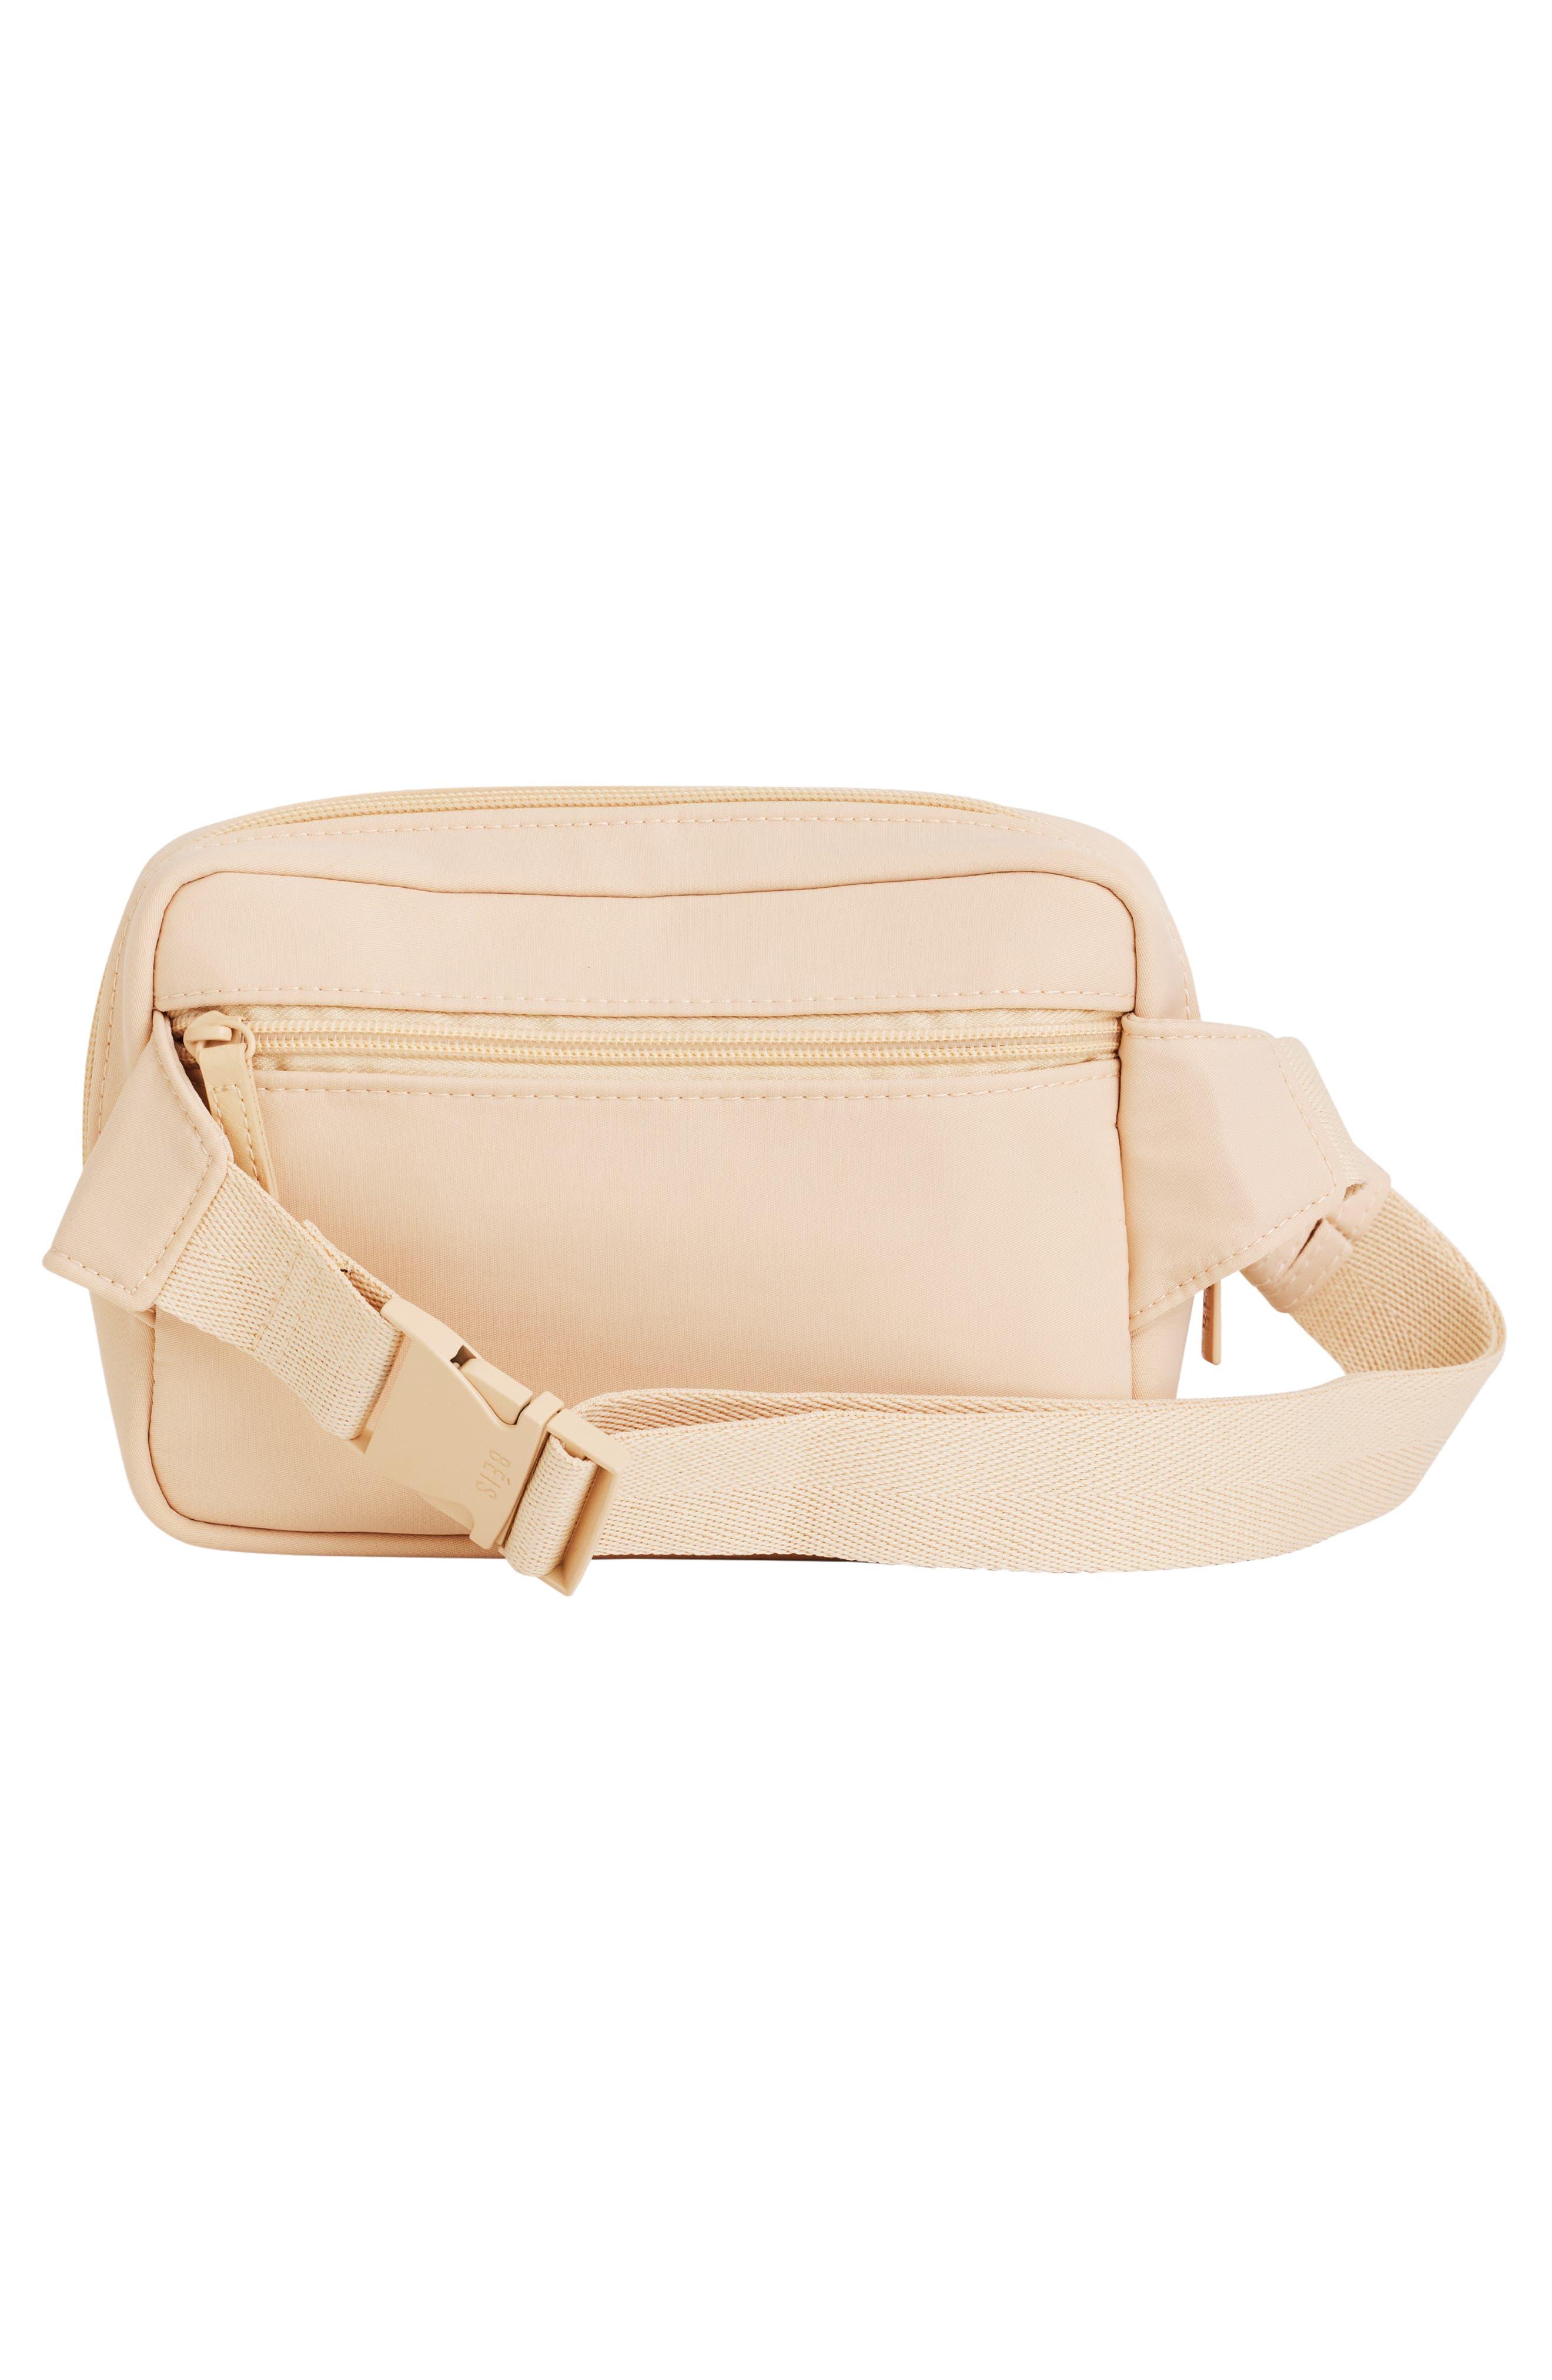 BEIS The Belt Bag in Pink | Lyst